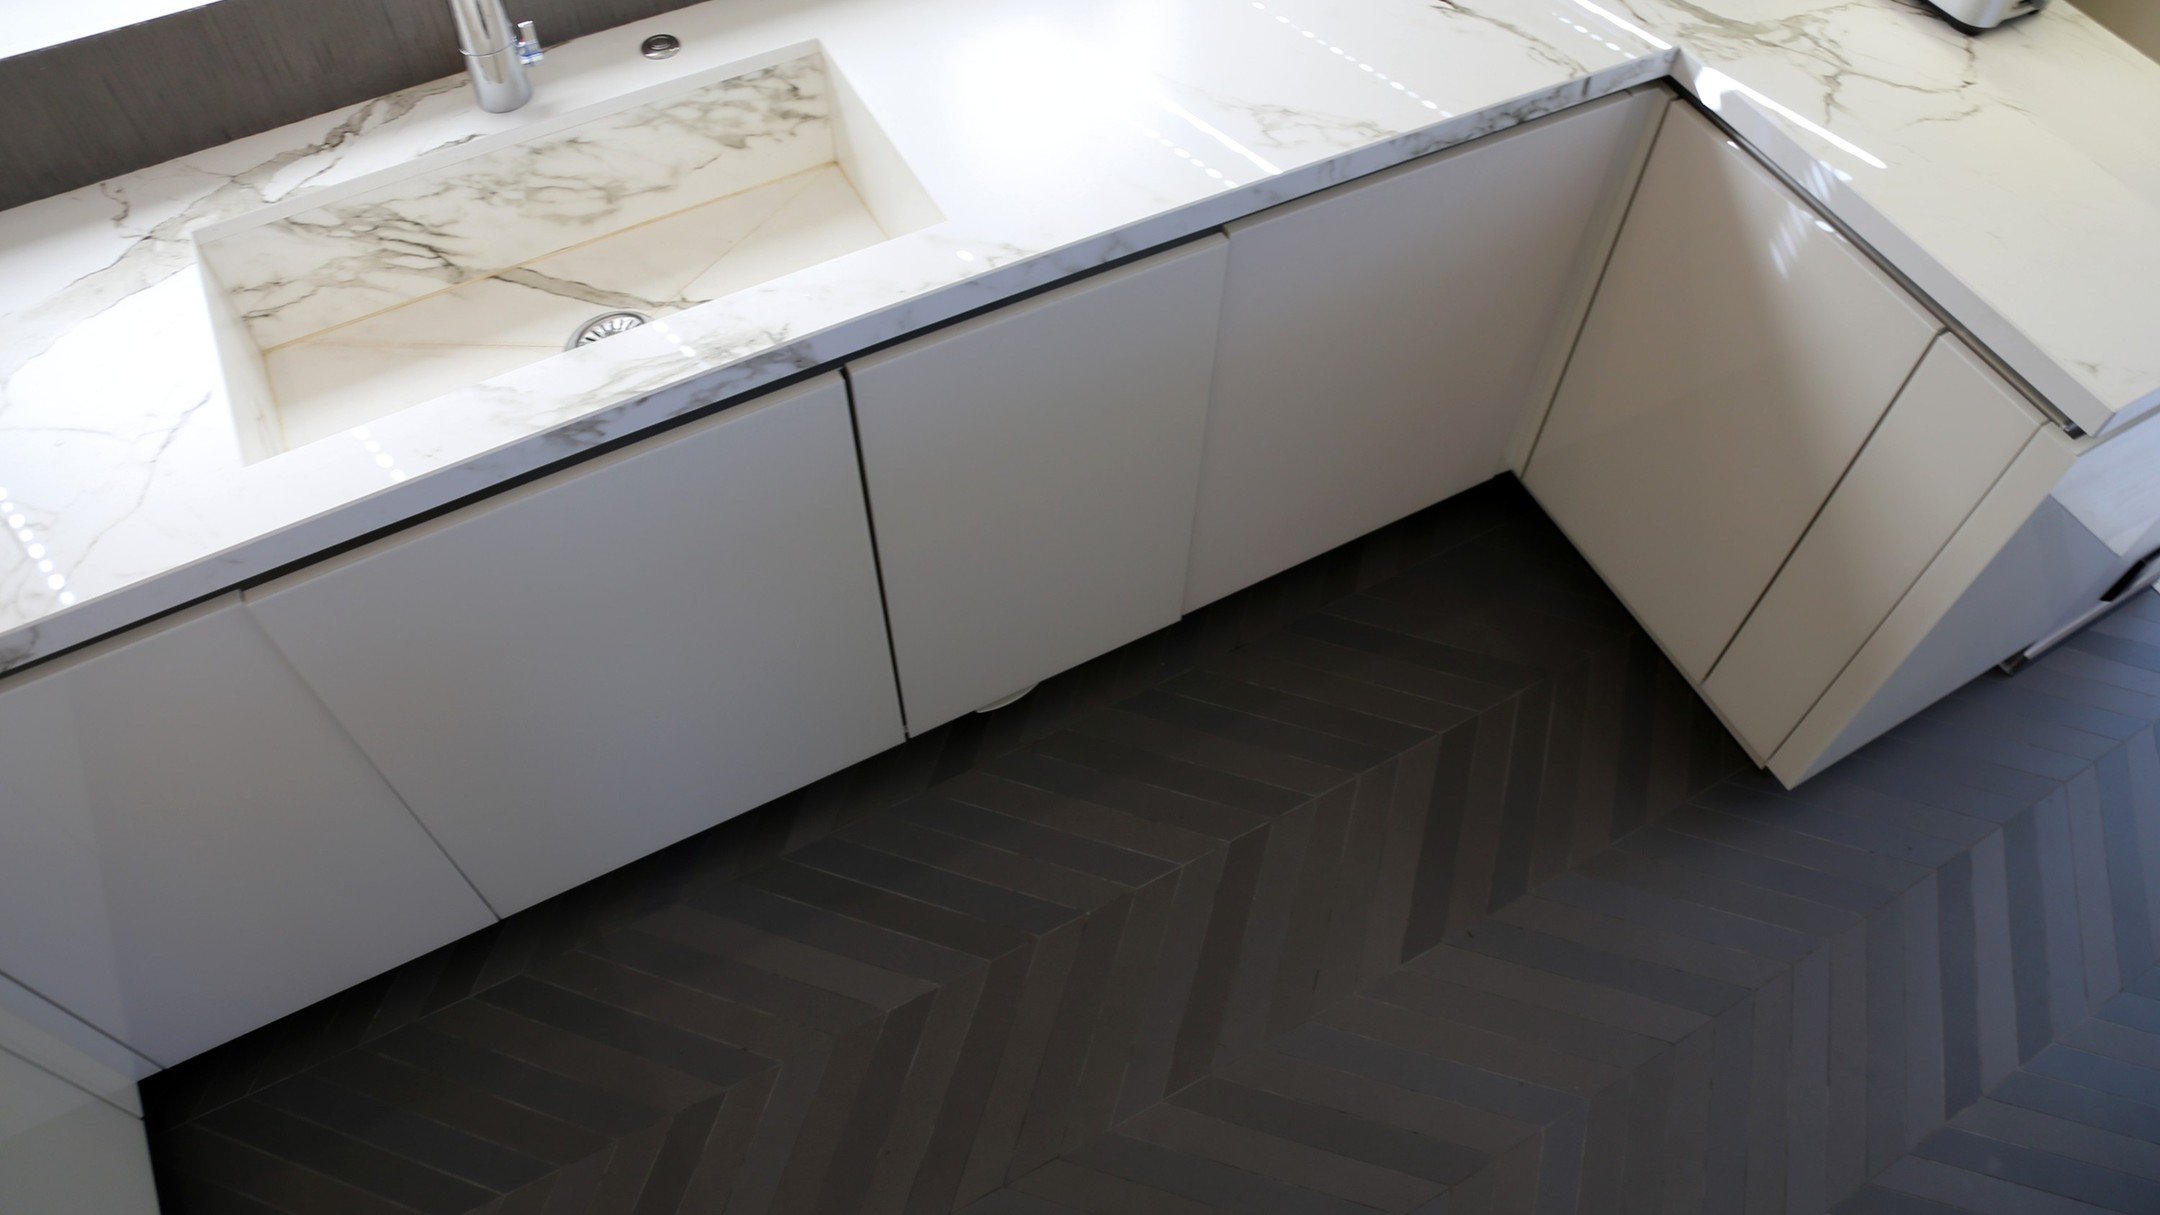 Chevron floor tiles offer a dynamic visual element with their distinctive pattern, especially when laid out meticulously one by one. When paired with modern and sleek kitchen cabinetry, the contrast can be striking, creating a contemporary and stylis